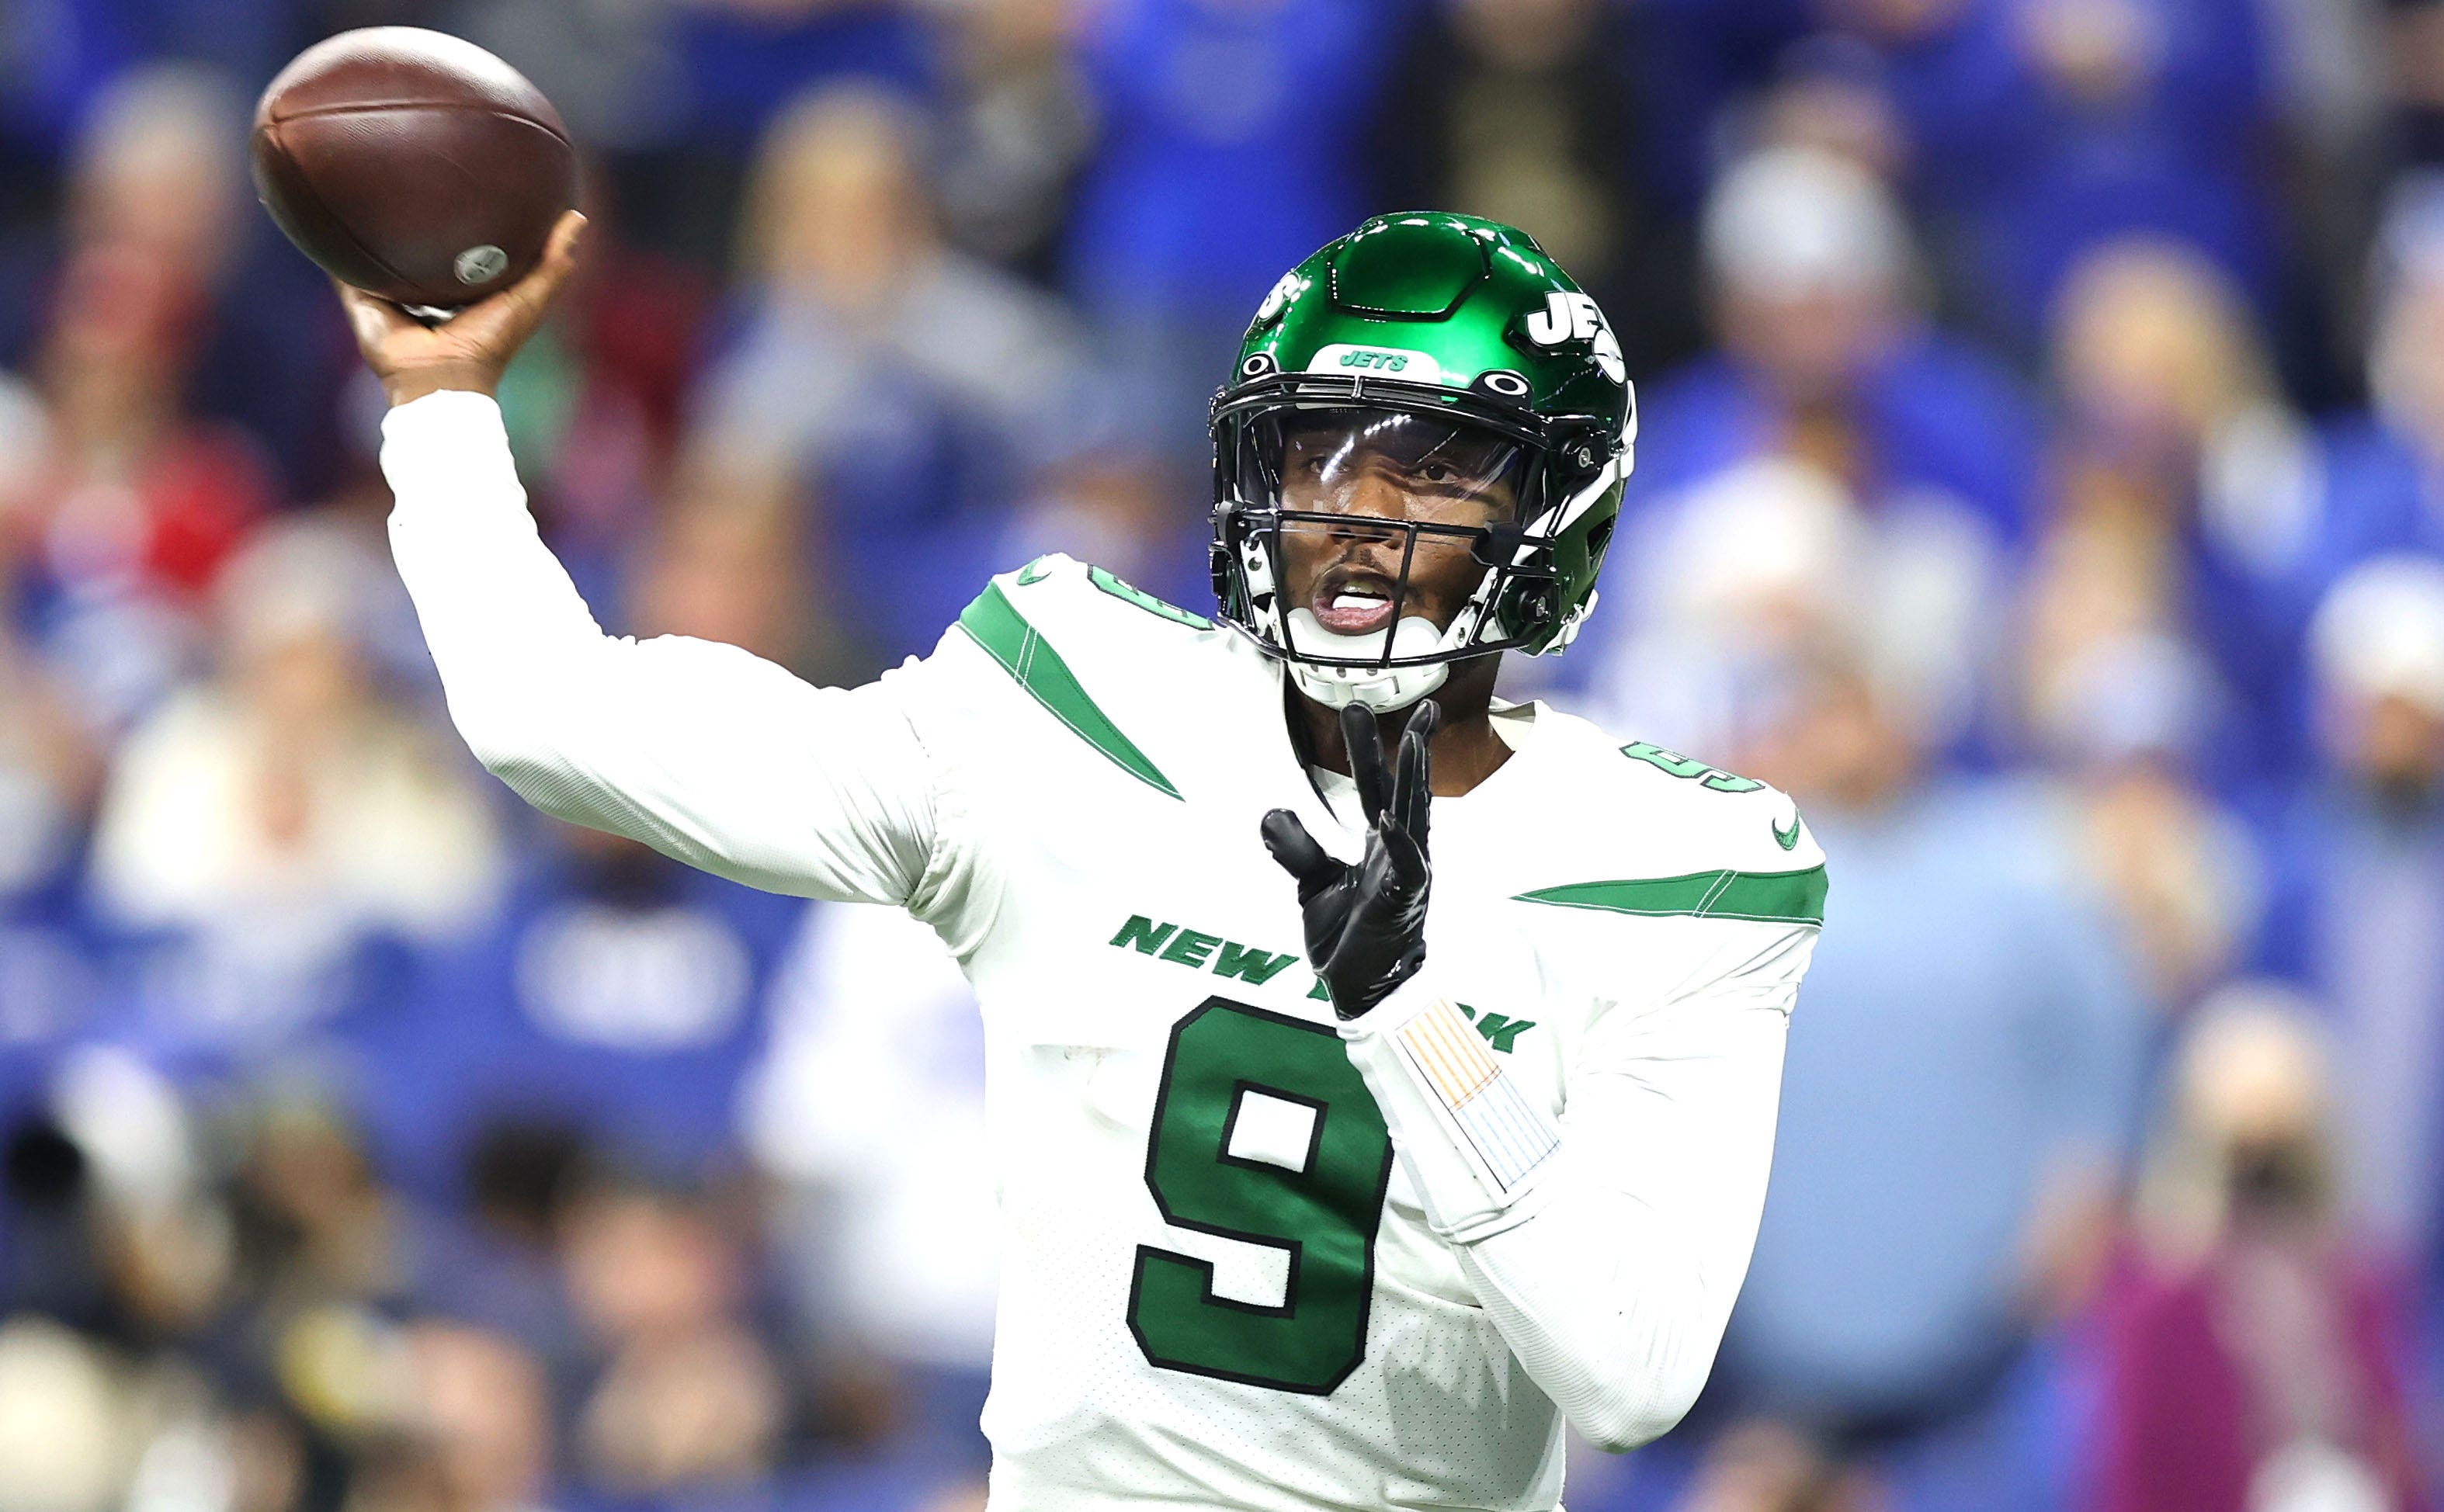 New York Jets quarterback Josh Johnson throwing a pass against the Indianapolis Colts